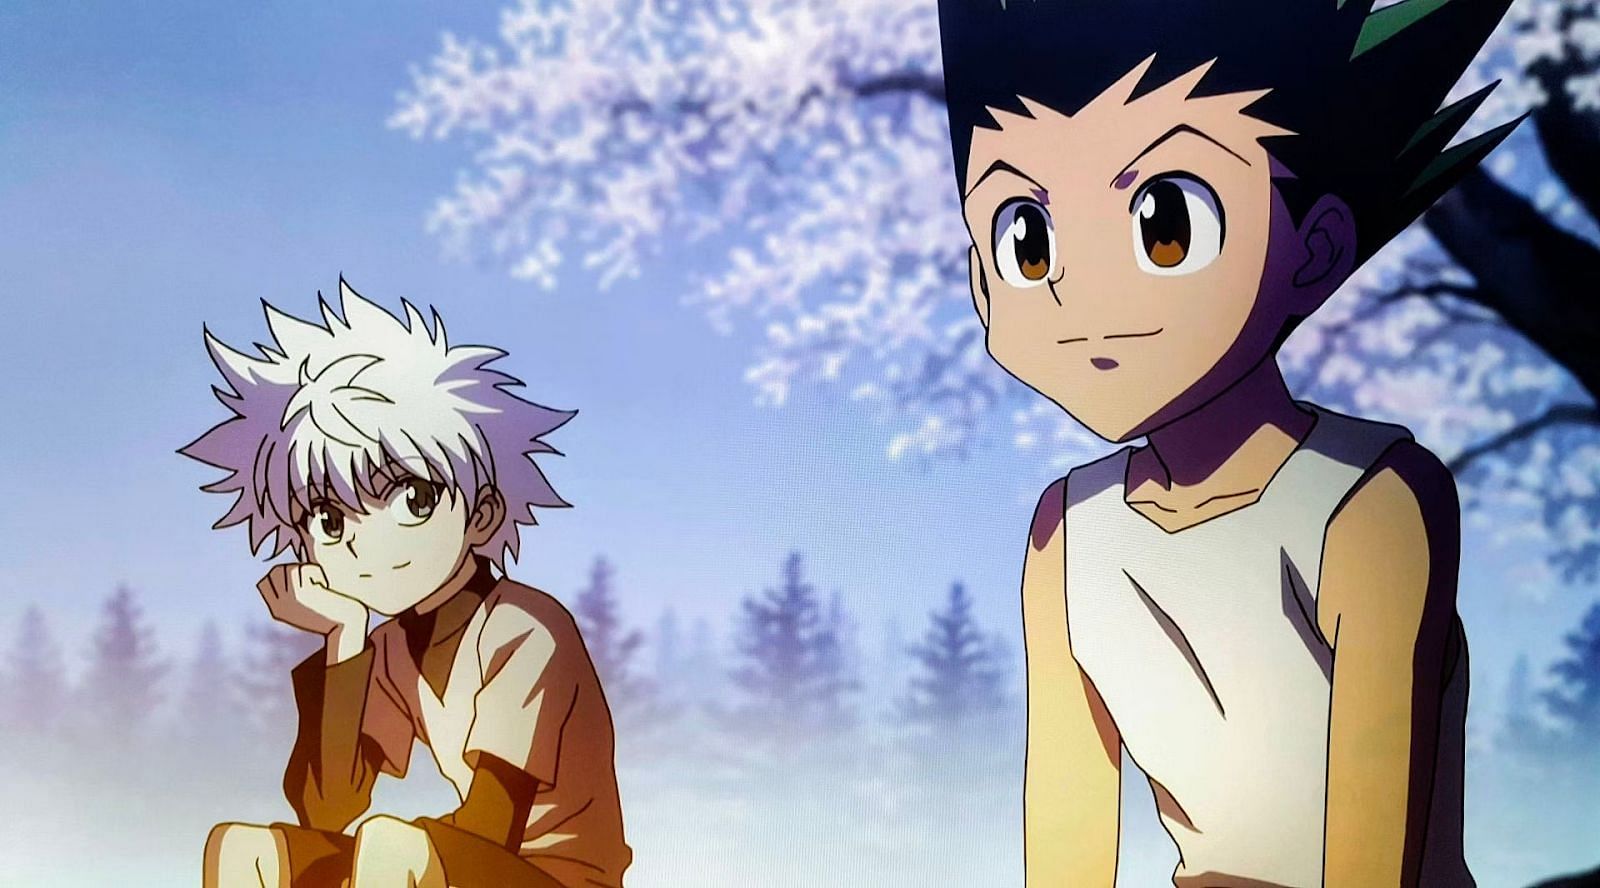 As of today, how many episodes are there of HunterxHunter in May